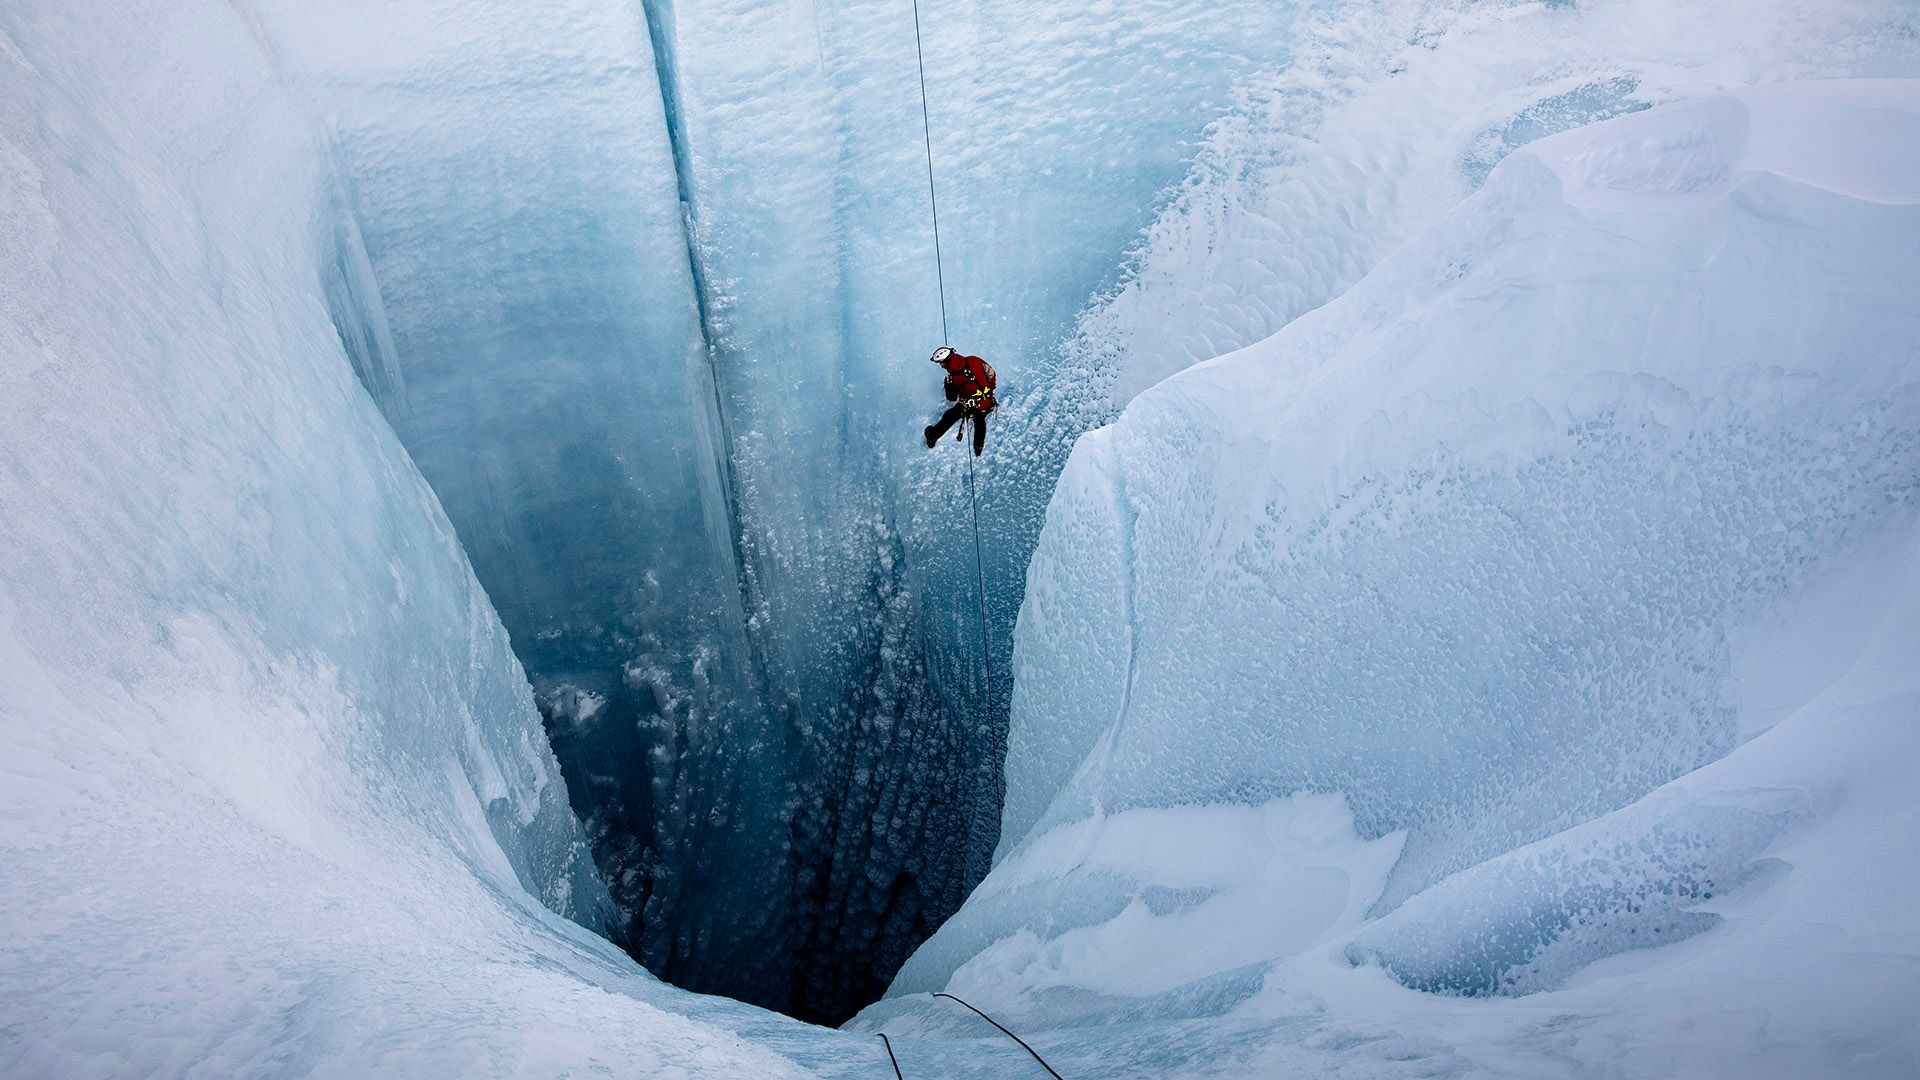 Into the Ice